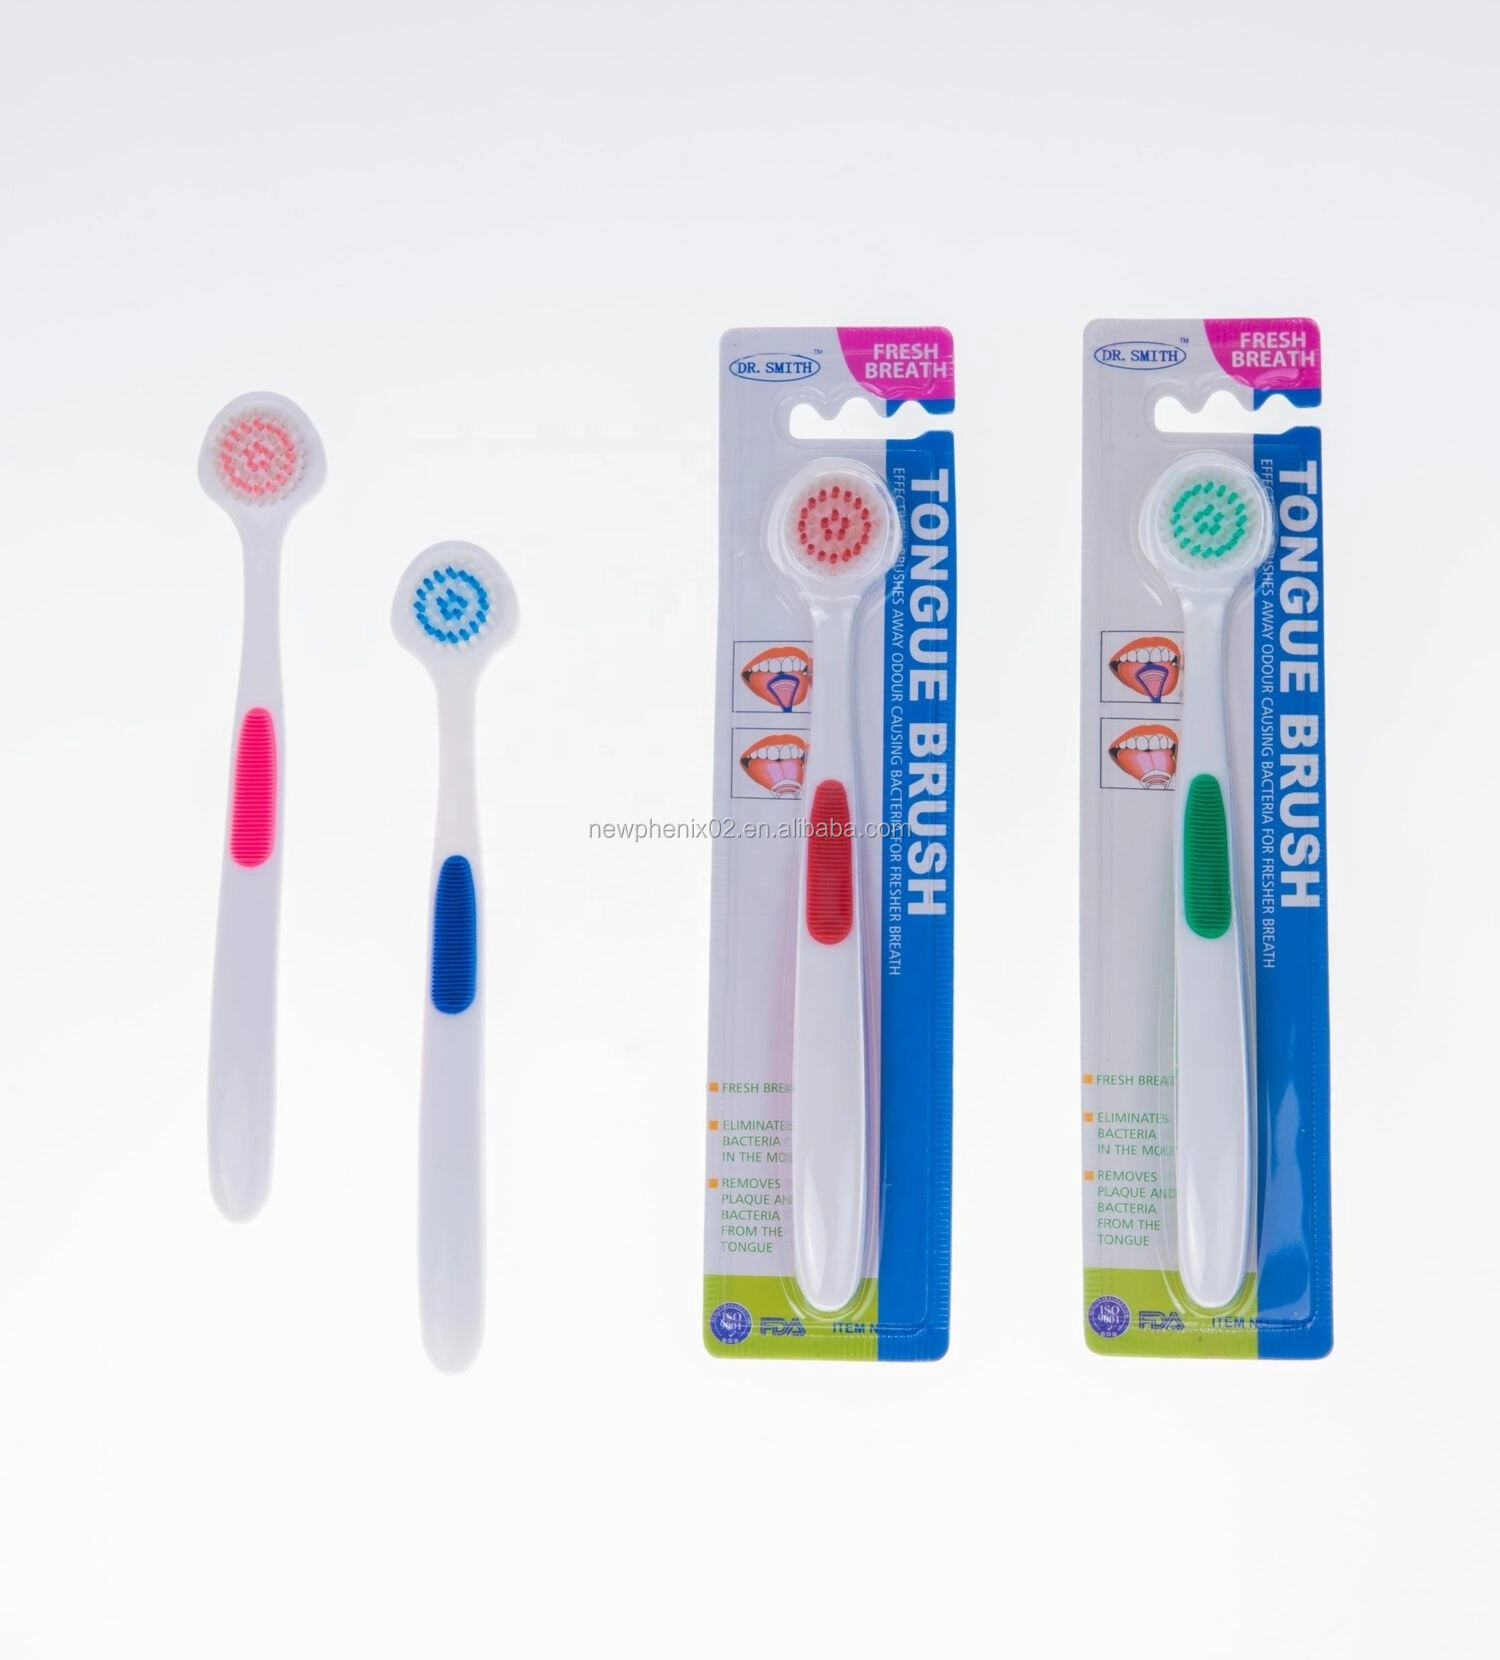 Daily Use Professional Oral Care Product Tongue Cleaner tongue scraper Tongue Cleaner details